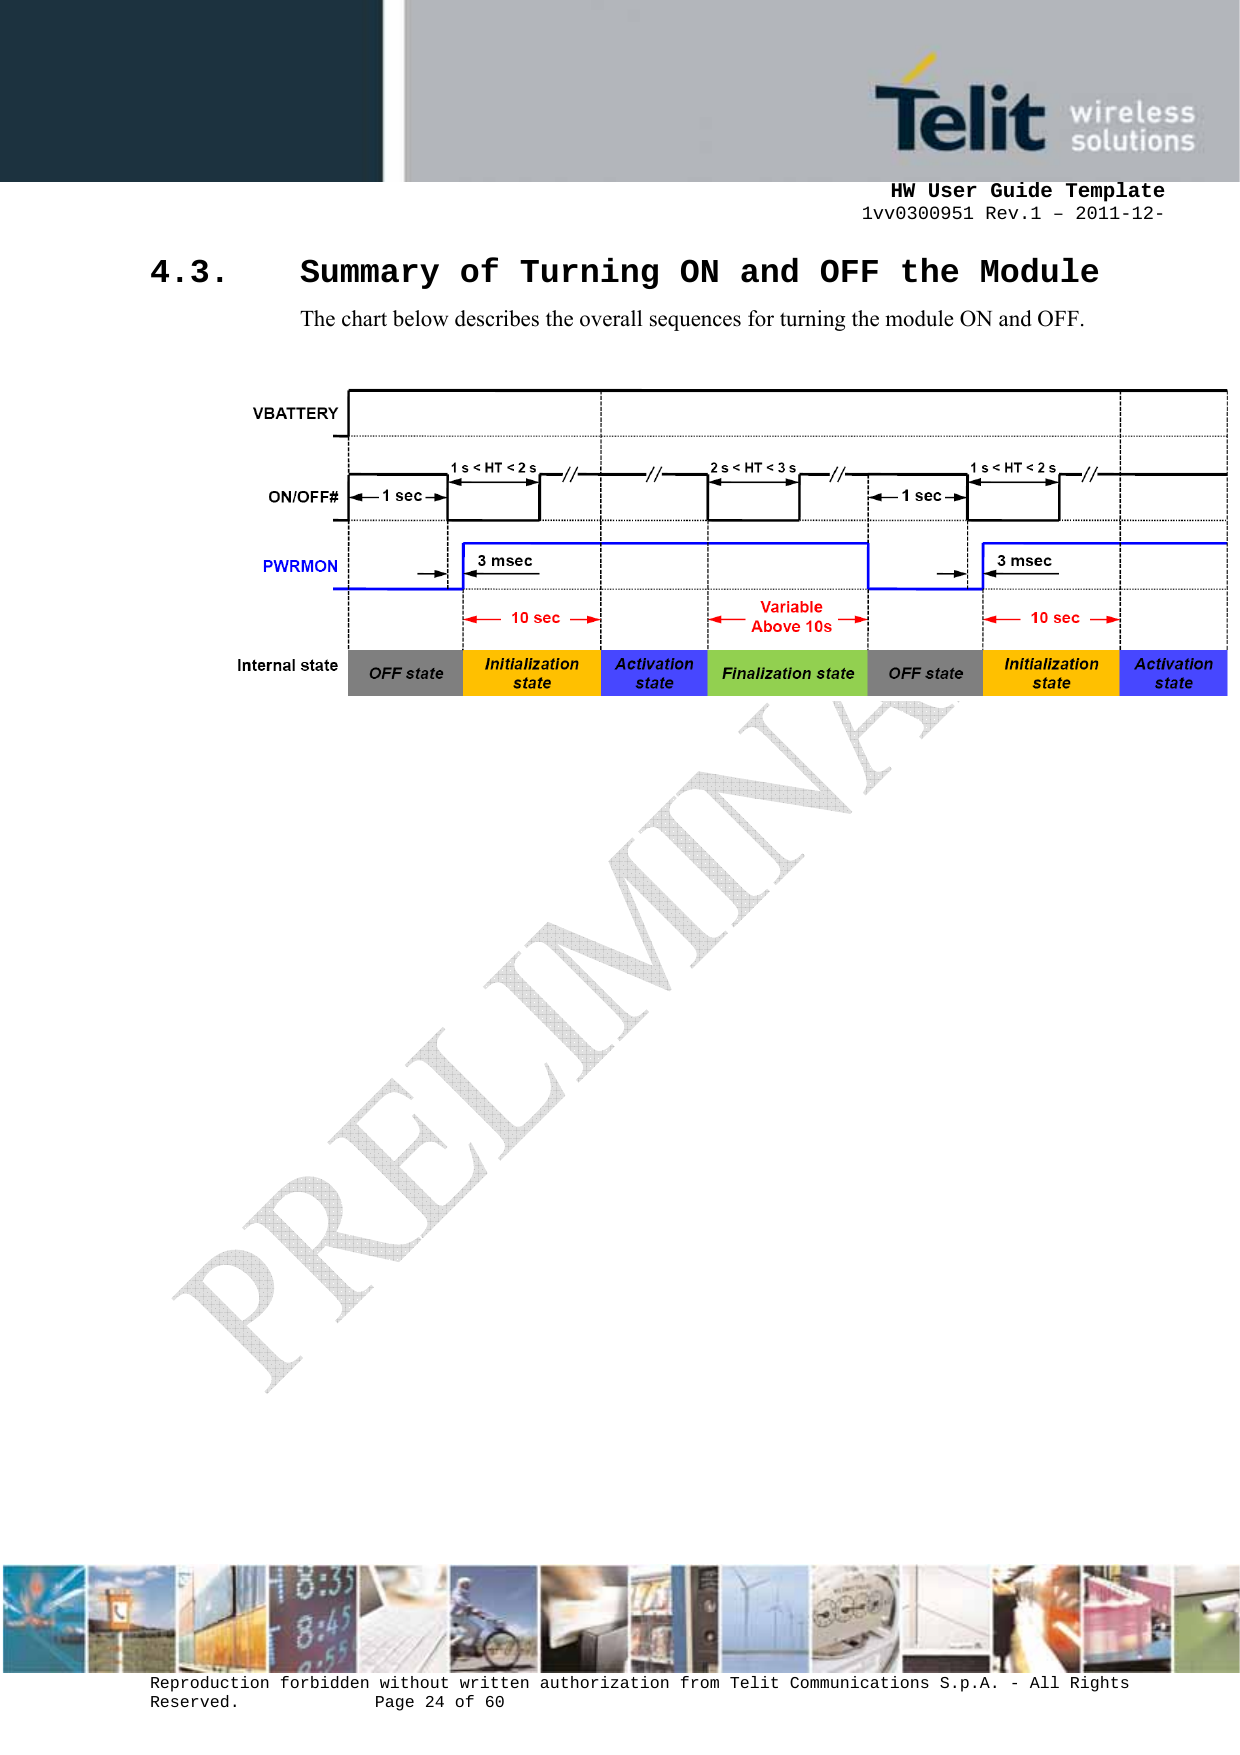      HW User Guide Template 1vv0300951 Rev.1 – 2011-12-  Reproduction forbidden without written authorization from Telit Communications S.p.A. - All Rights Reserved.    Page 24 of 60                                                     4.3. Summary of Turning ON and OFF the Module The chart below describes the overall sequences for turning the module ON and OFF.        